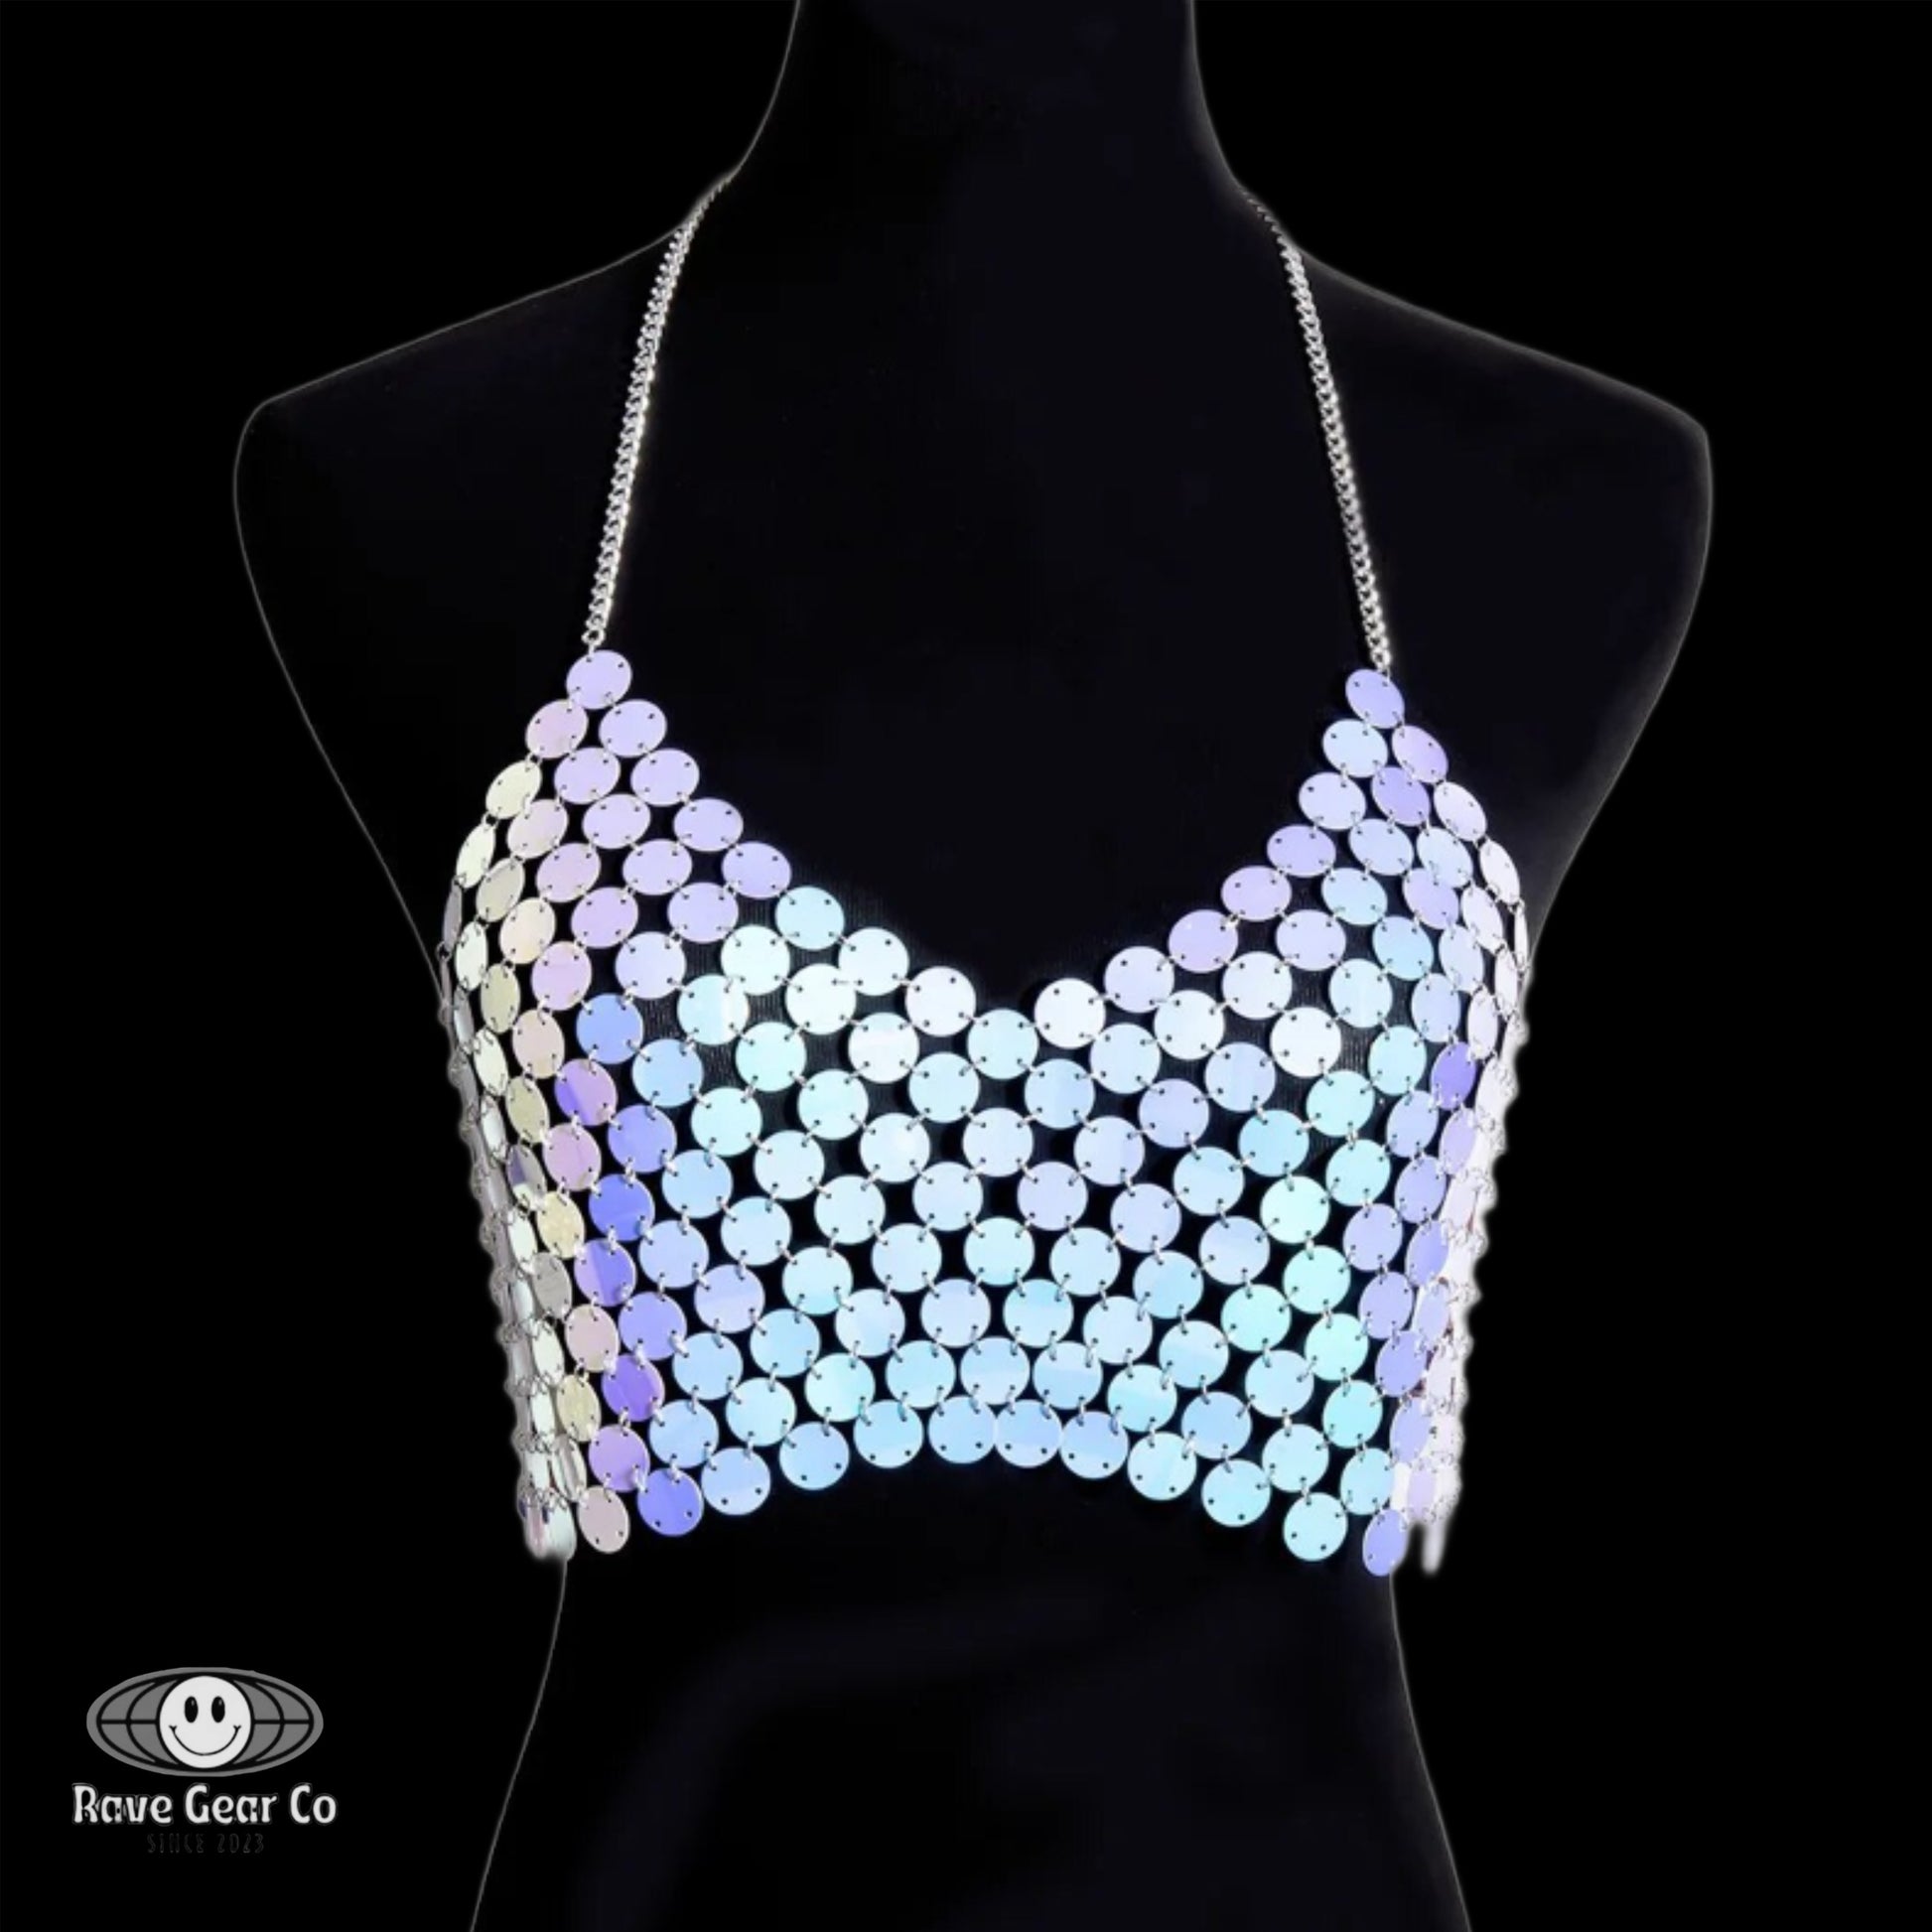 Rave Gear - Disco Ball Mirror Bra top rave festival set crop top and metal  chain belt backless